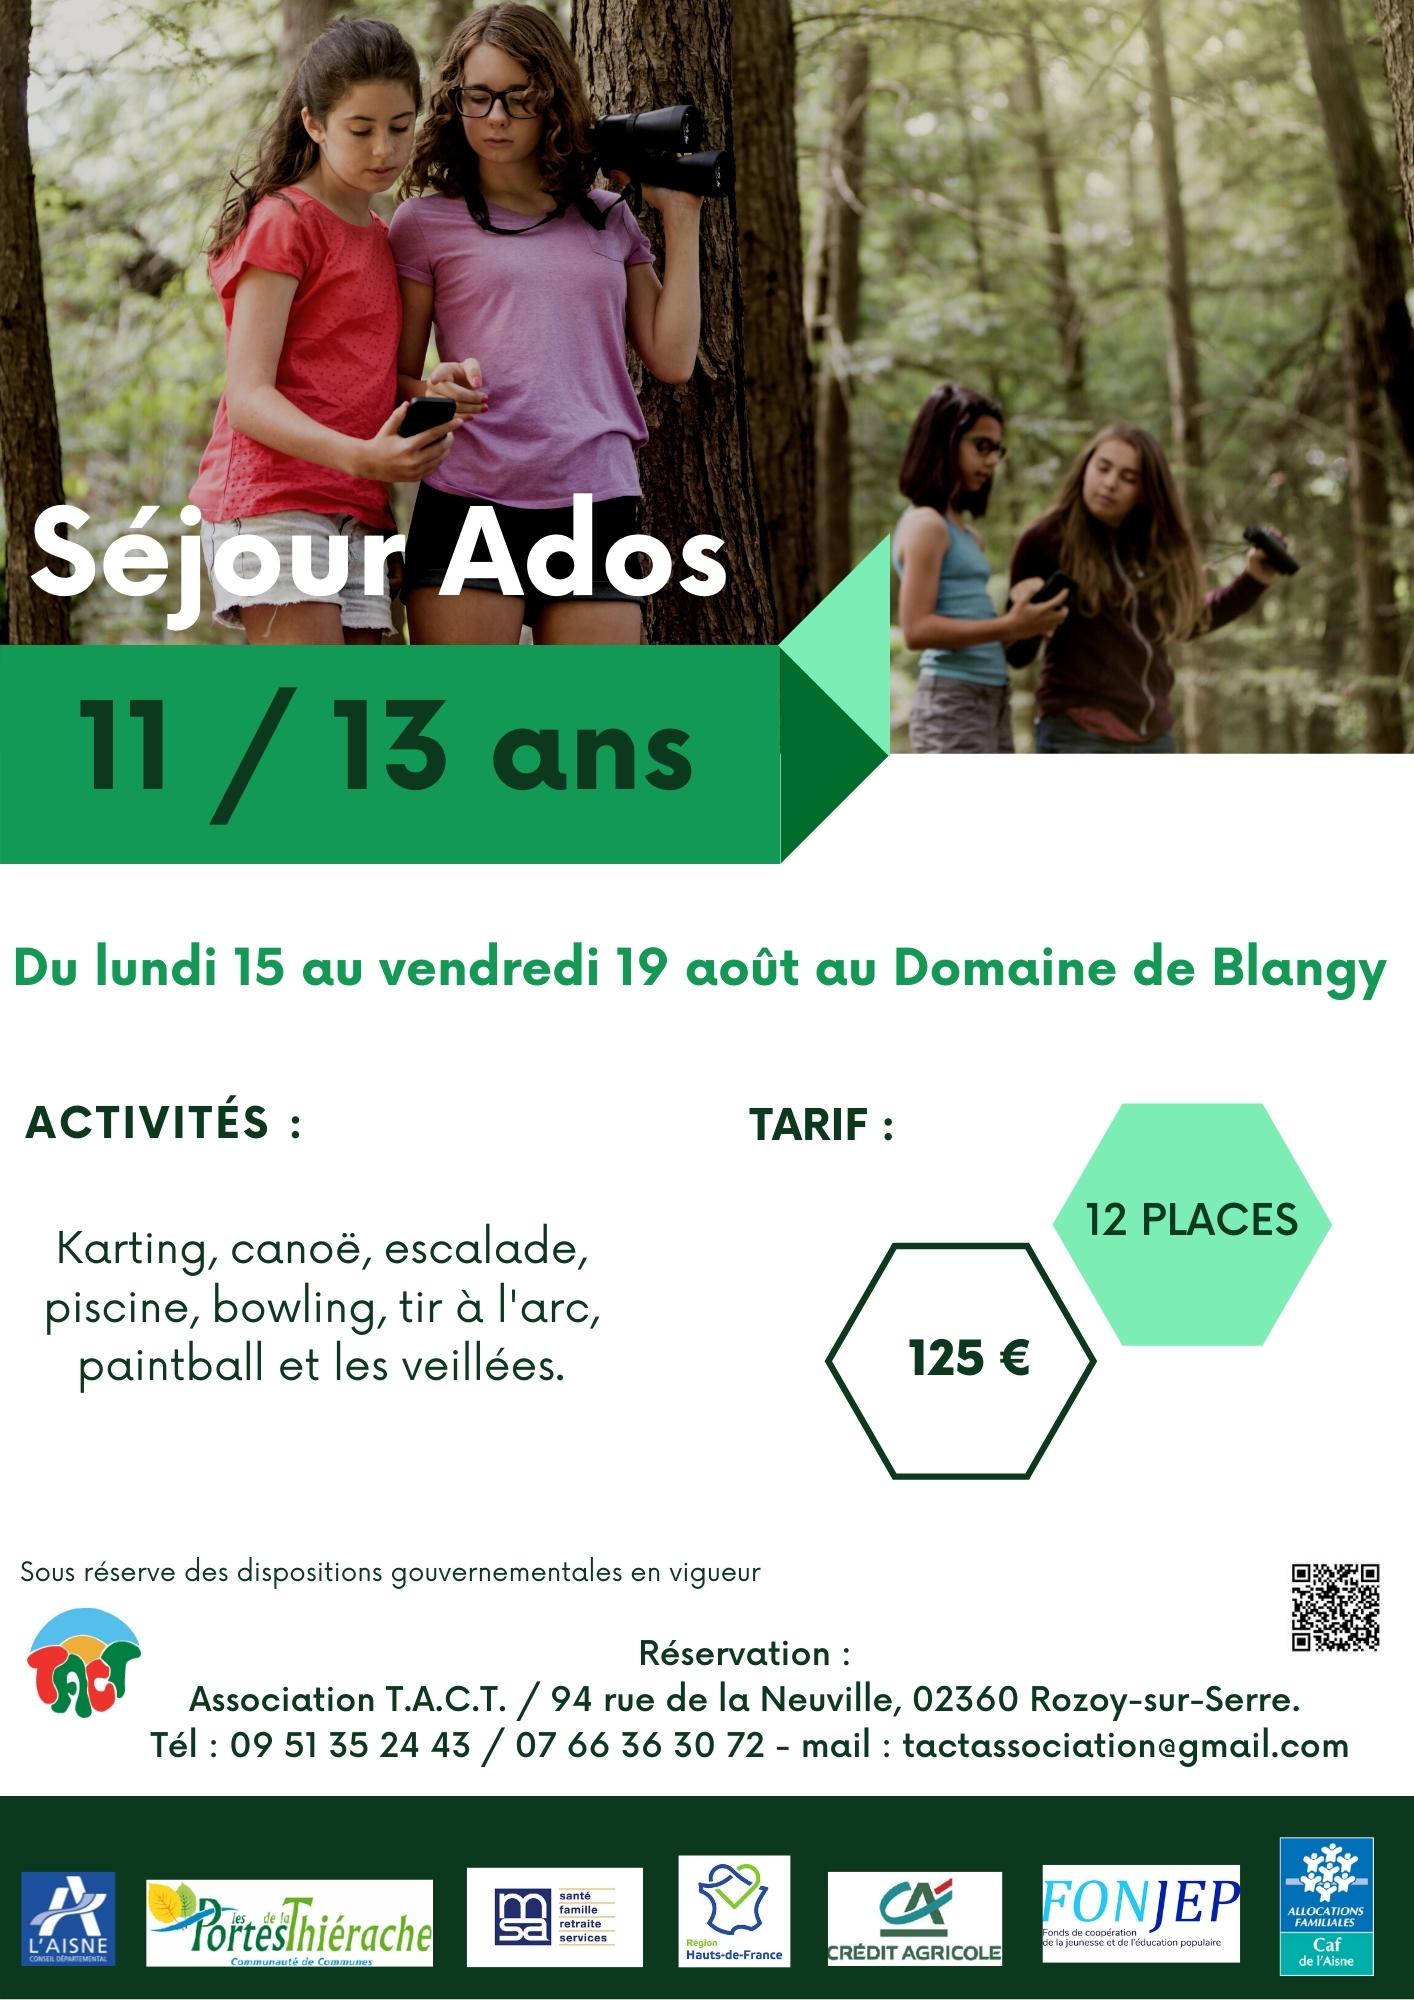 You are currently viewing Séjour Ados 11 / 13 ans